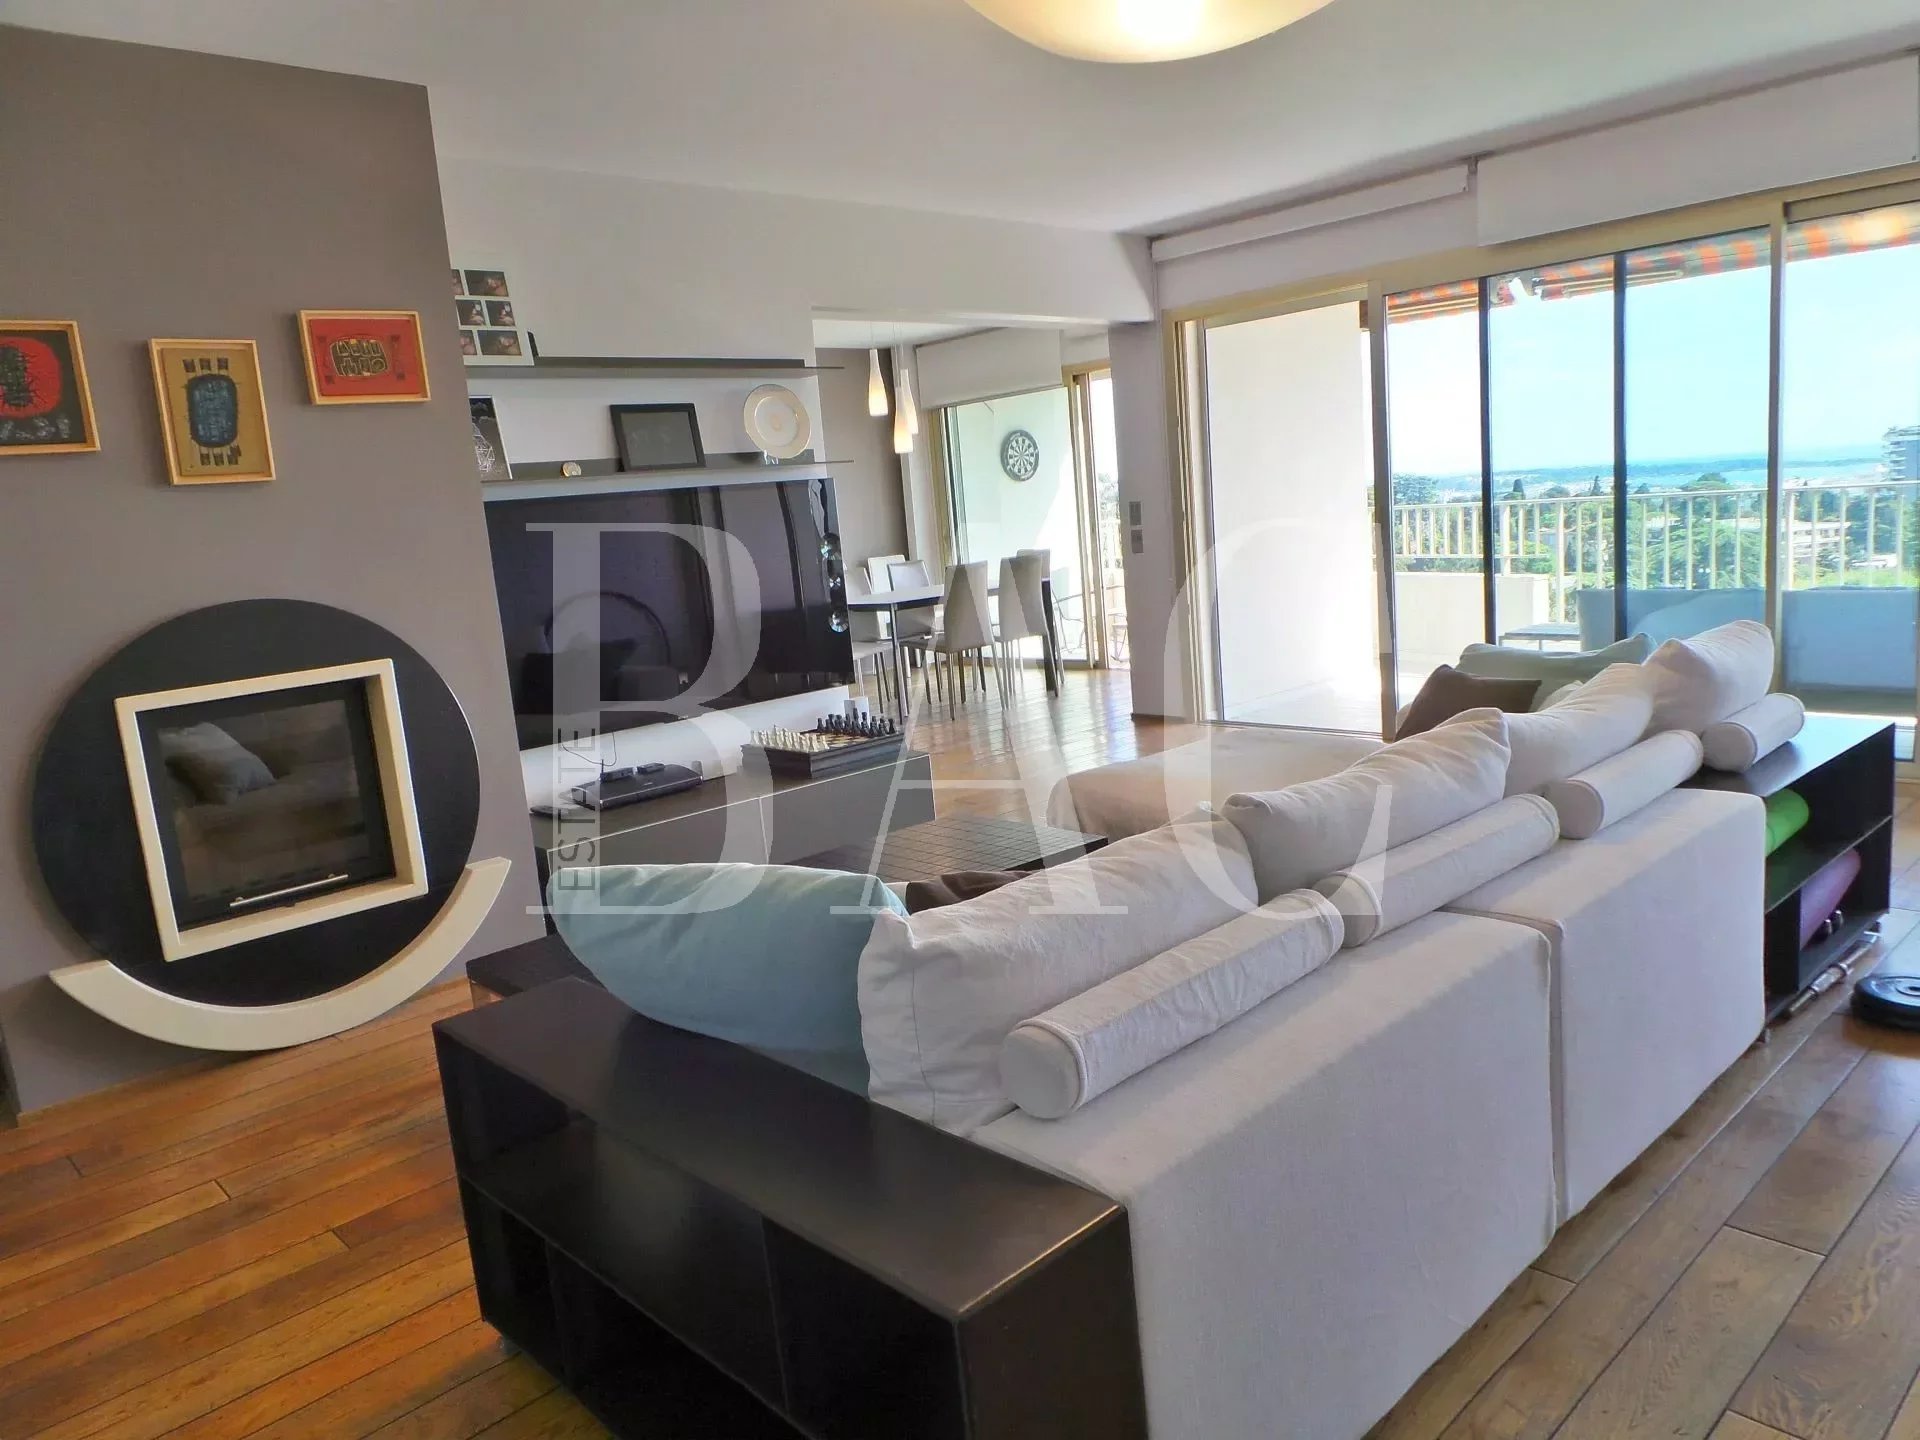 Cannes, apartment 2000 meters from the Palais des Festivals and enjoying a panoramic sea view